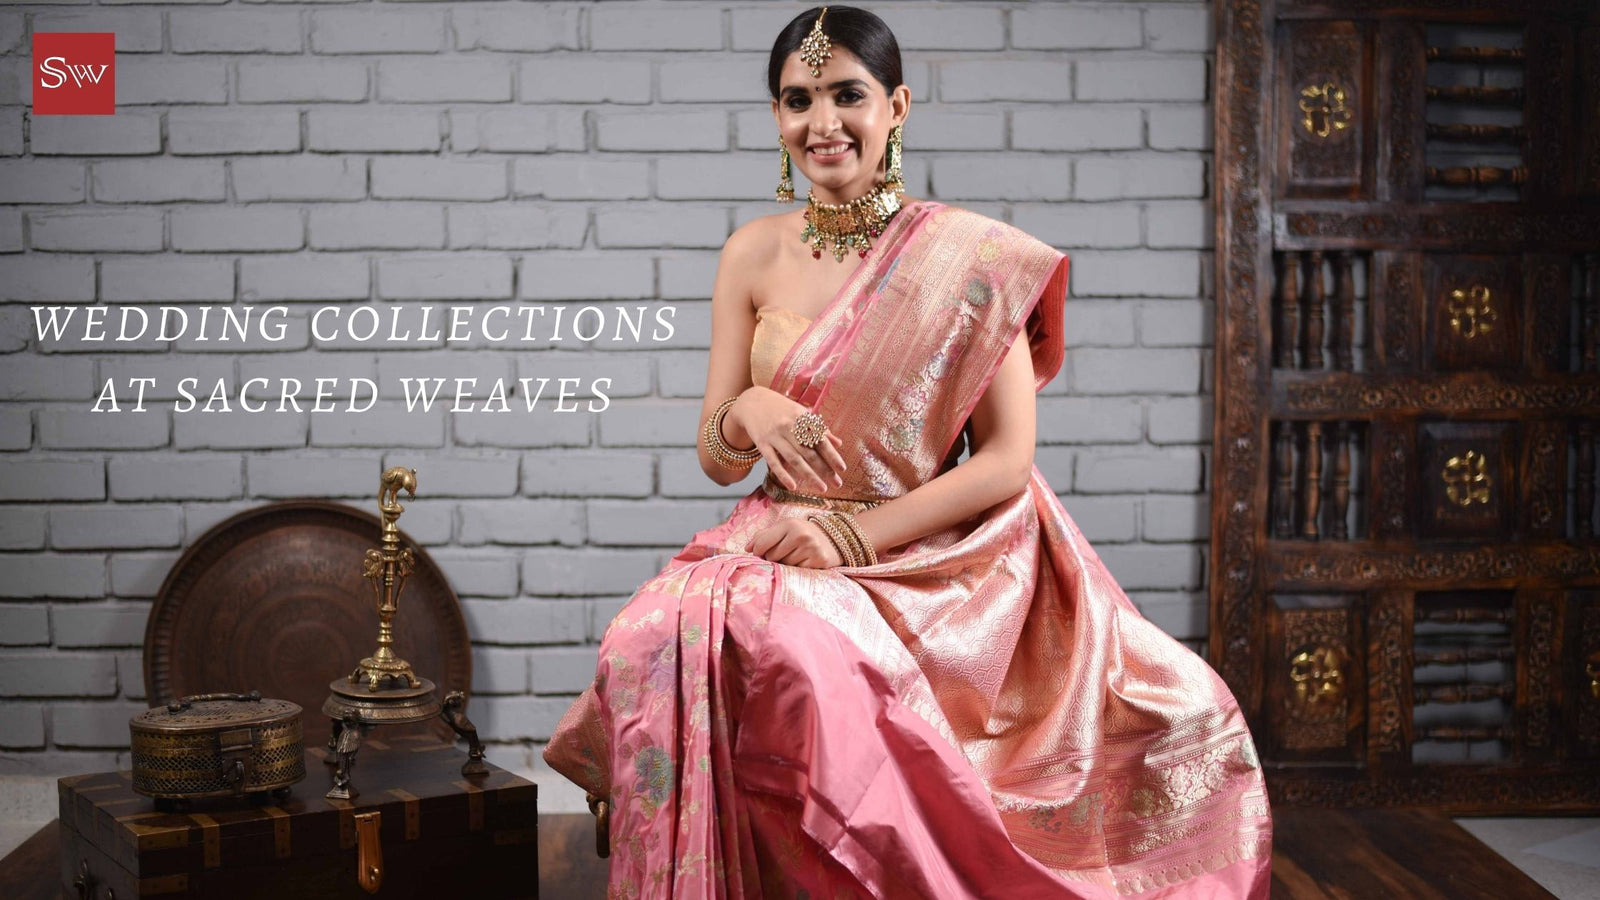 Wedtree - Women love Sarees! ♥ If it's a return gift,... | Facebook